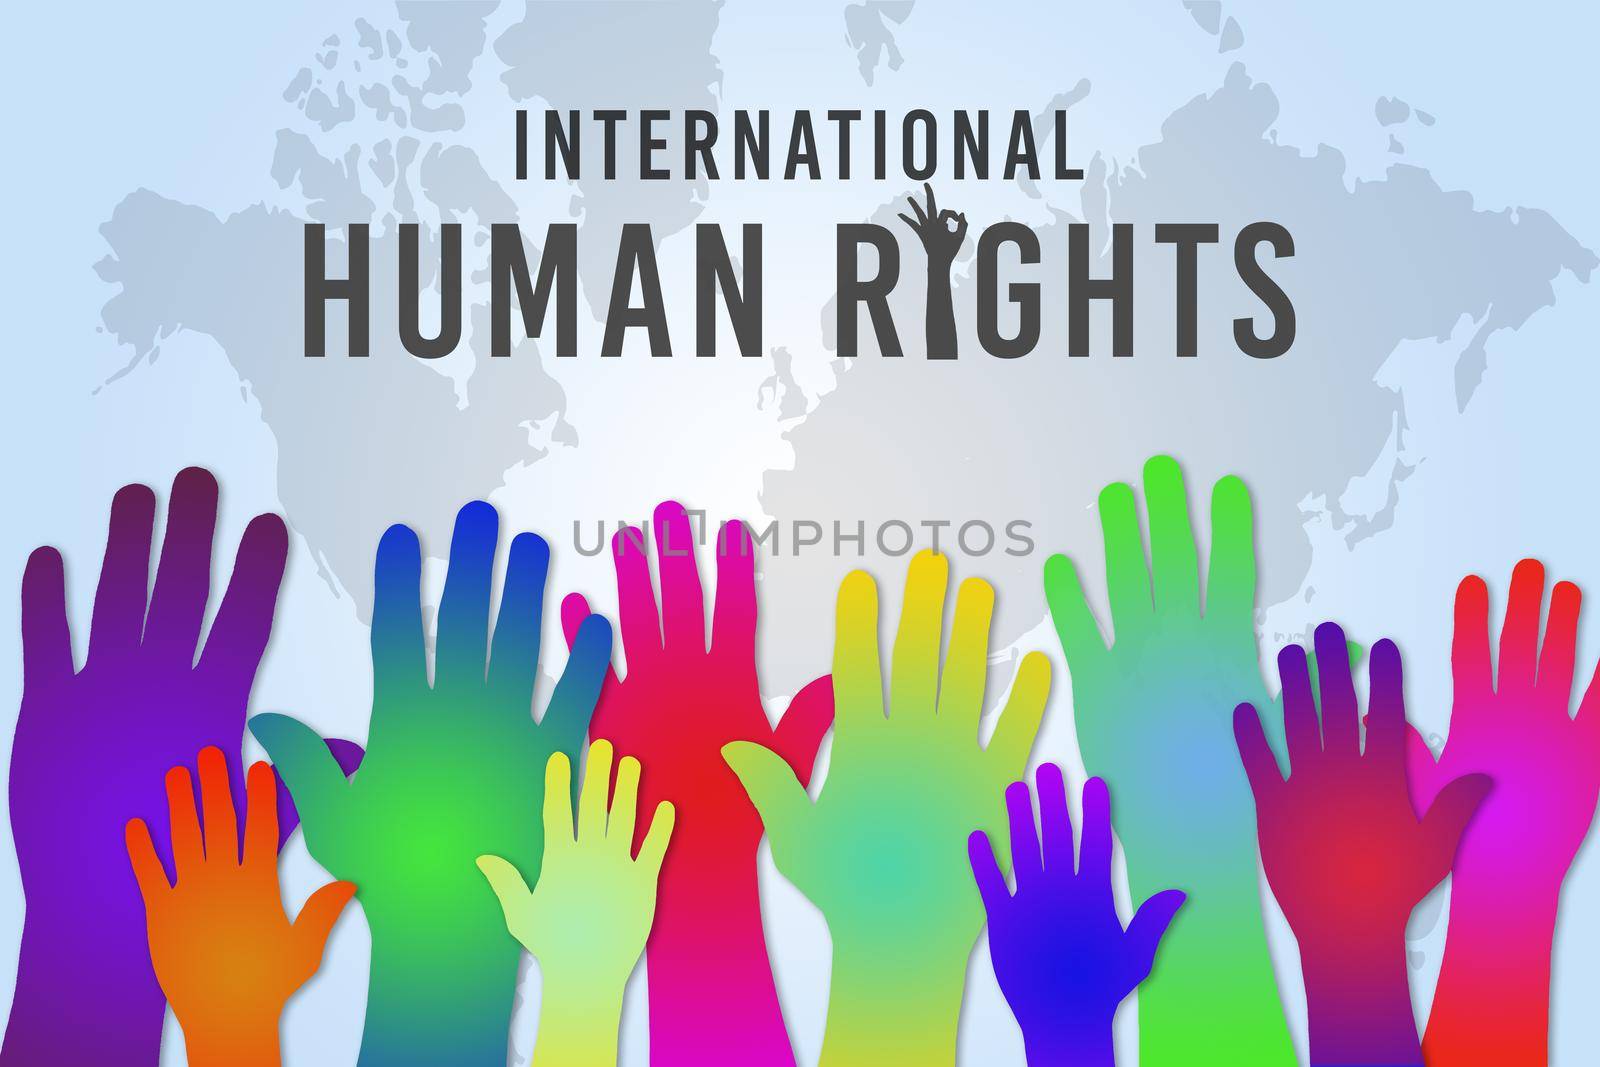 International Human Rights Day concept, raise hand up - illustration by psodaz